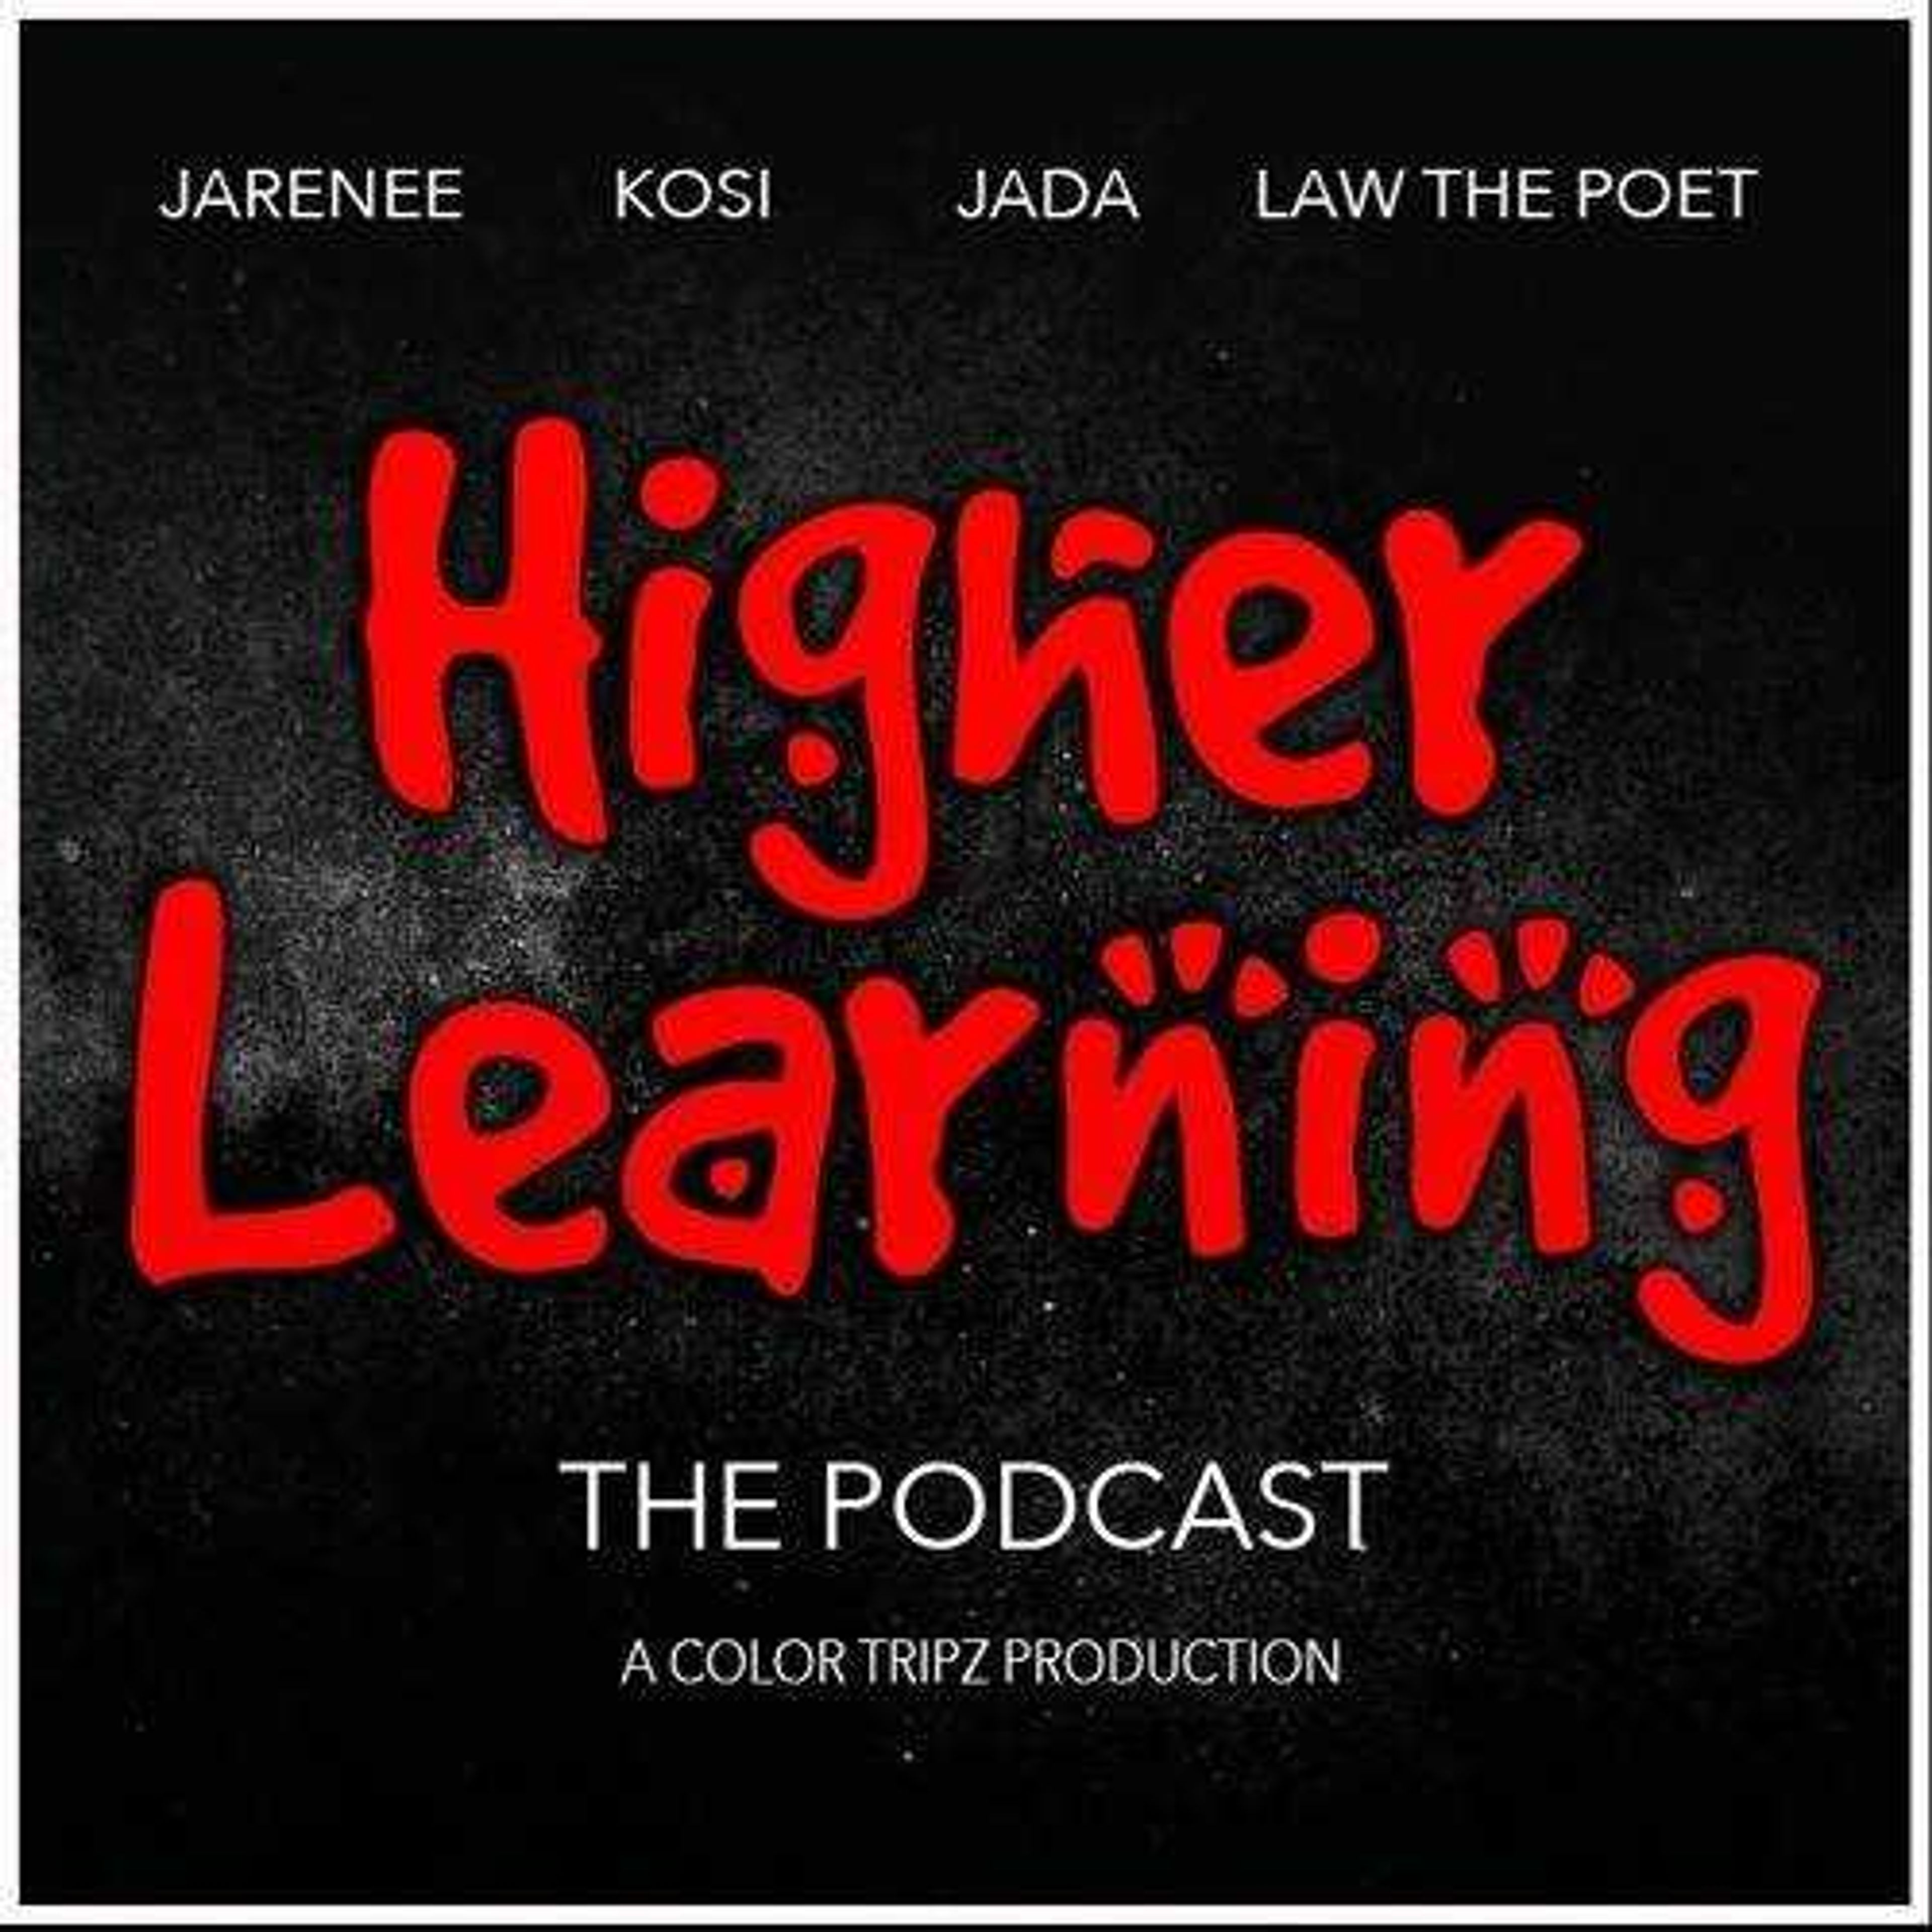 The flyer for "Higher Learning: The Podcast."